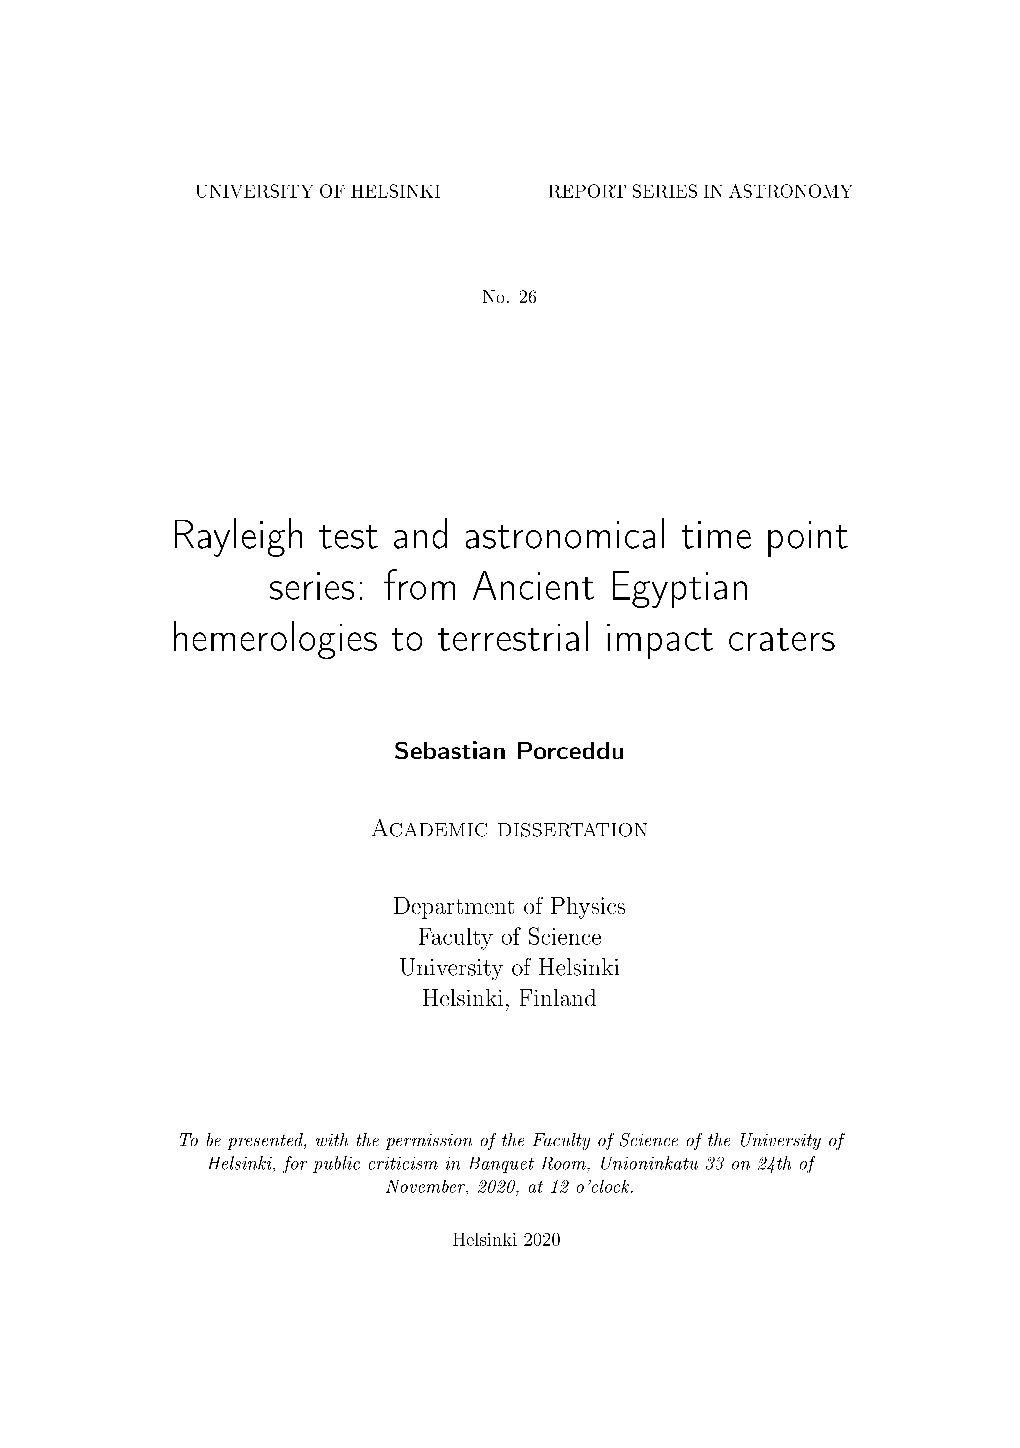 Rayleigh Test and Astronomical Time Point Series: from Ancient Egyptian Hemerologies to Terrestrial Impact Craters